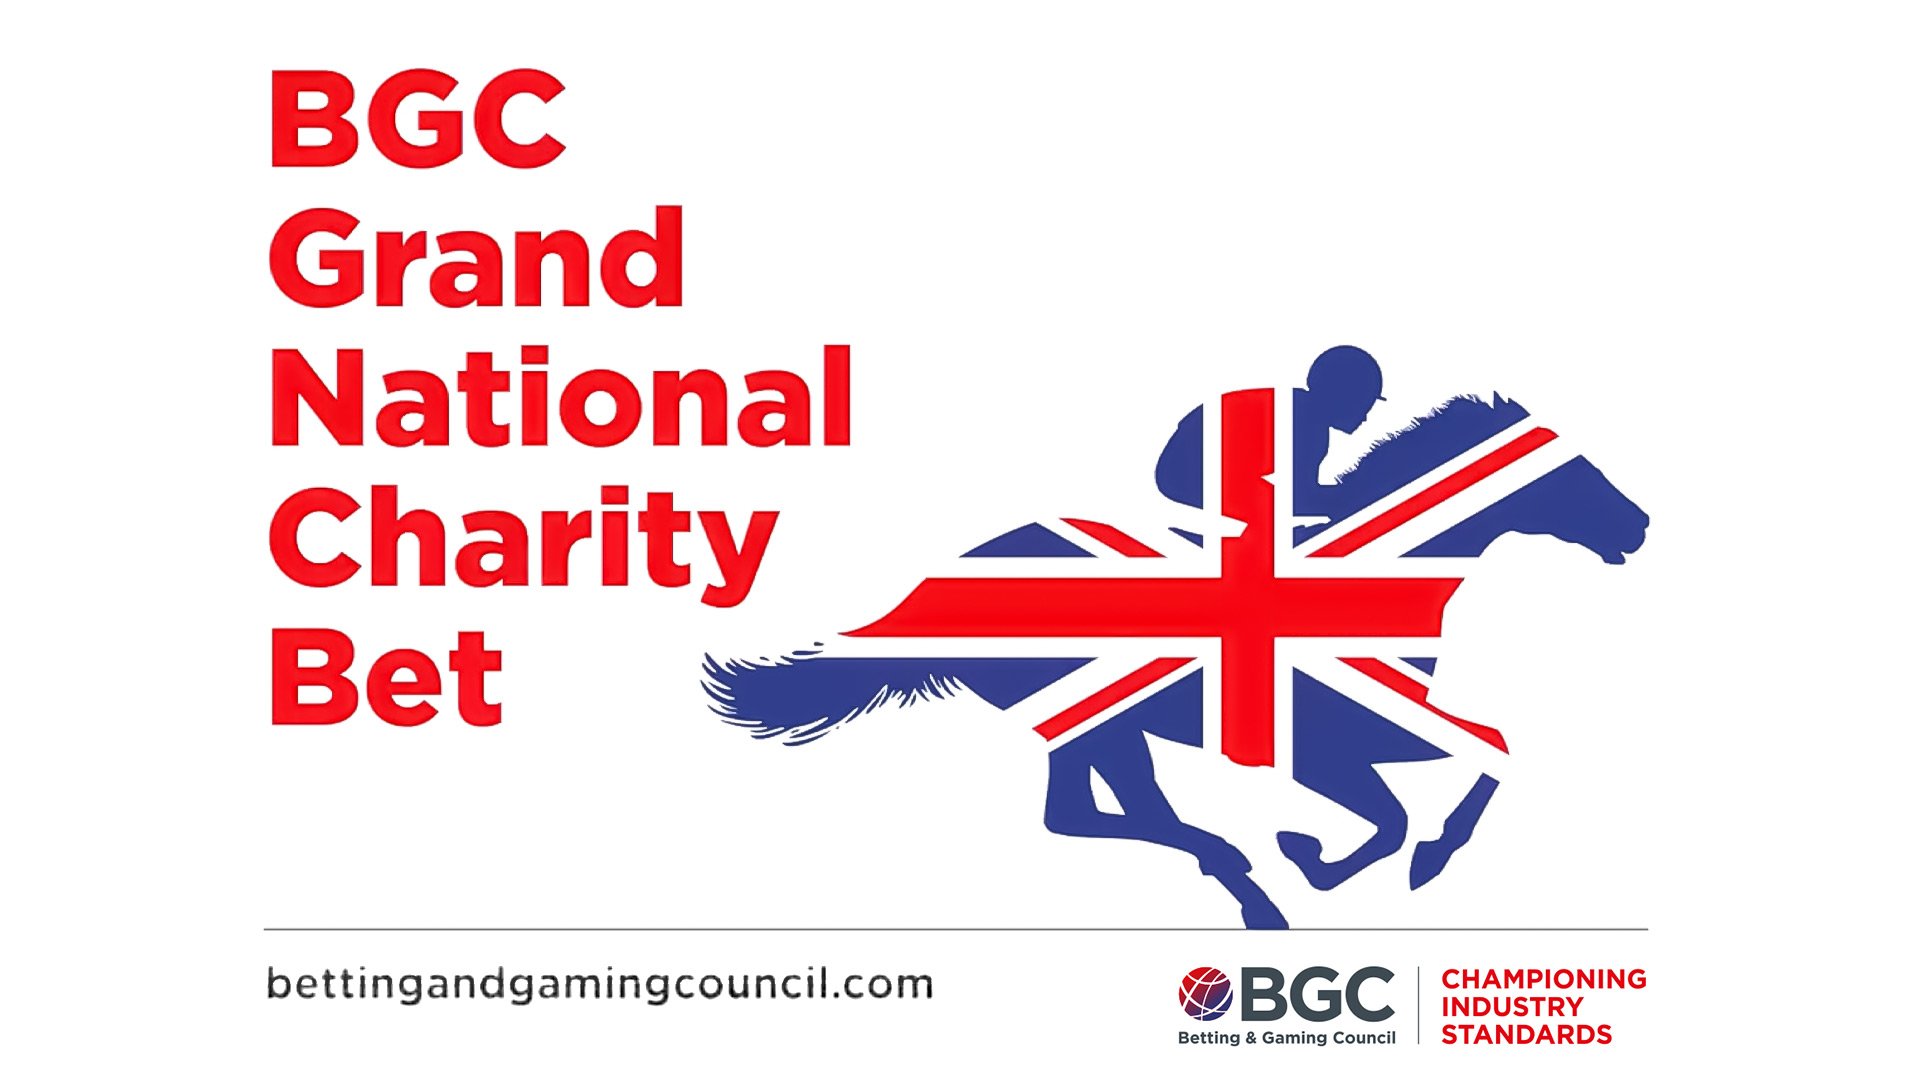 BGC Grand National Charity Bet campaign raises over $18K for charities across the UK